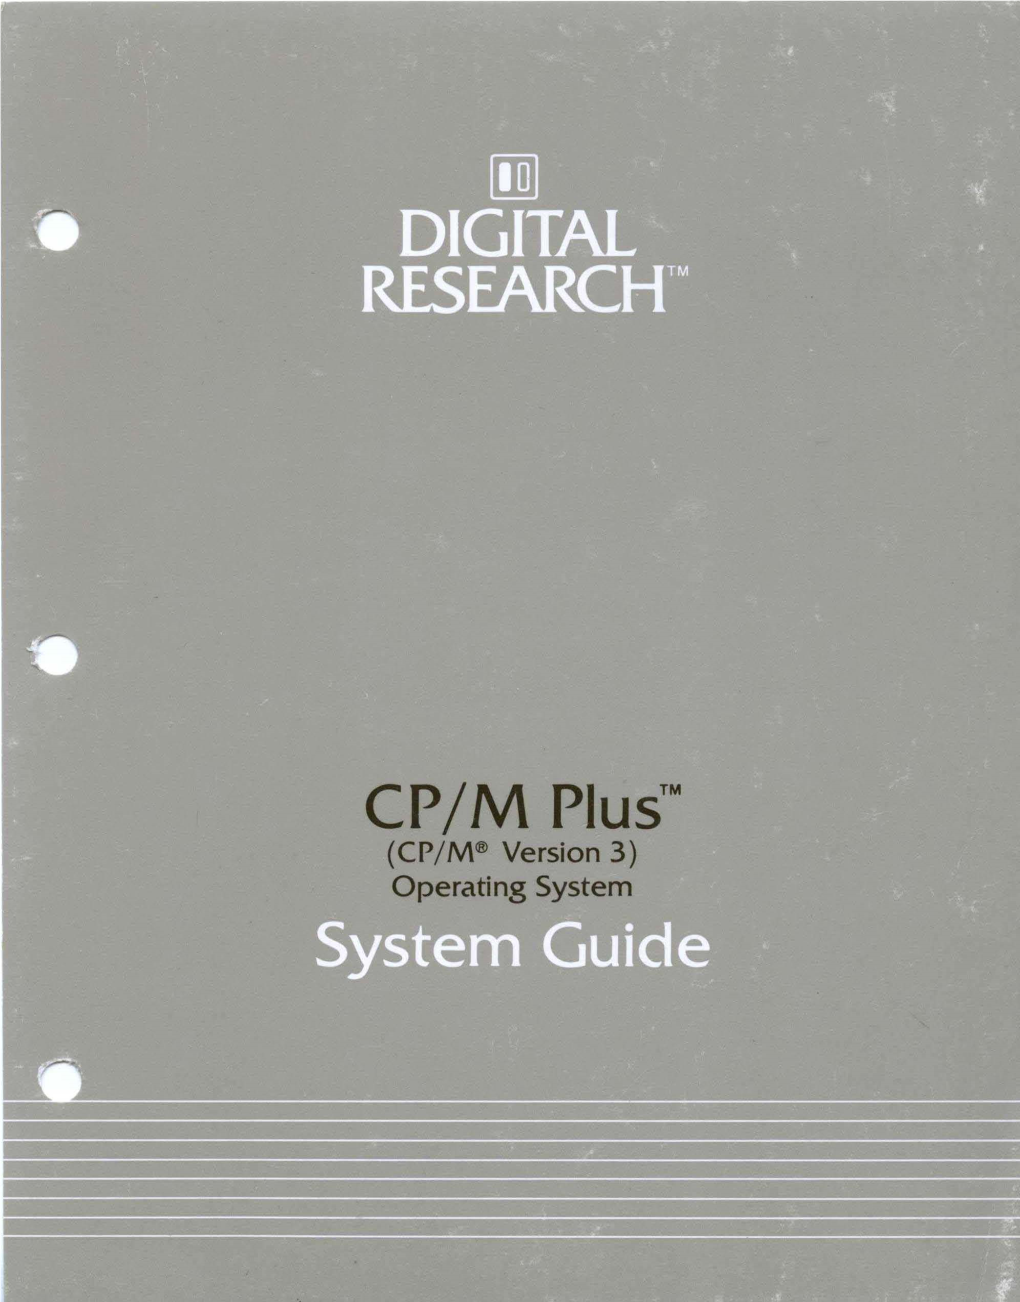 CP/M PIUS™ (CP/M® Version 3) Operating System CP/M PIUS™ (CP/M~ Version 3) Operating System System Guide